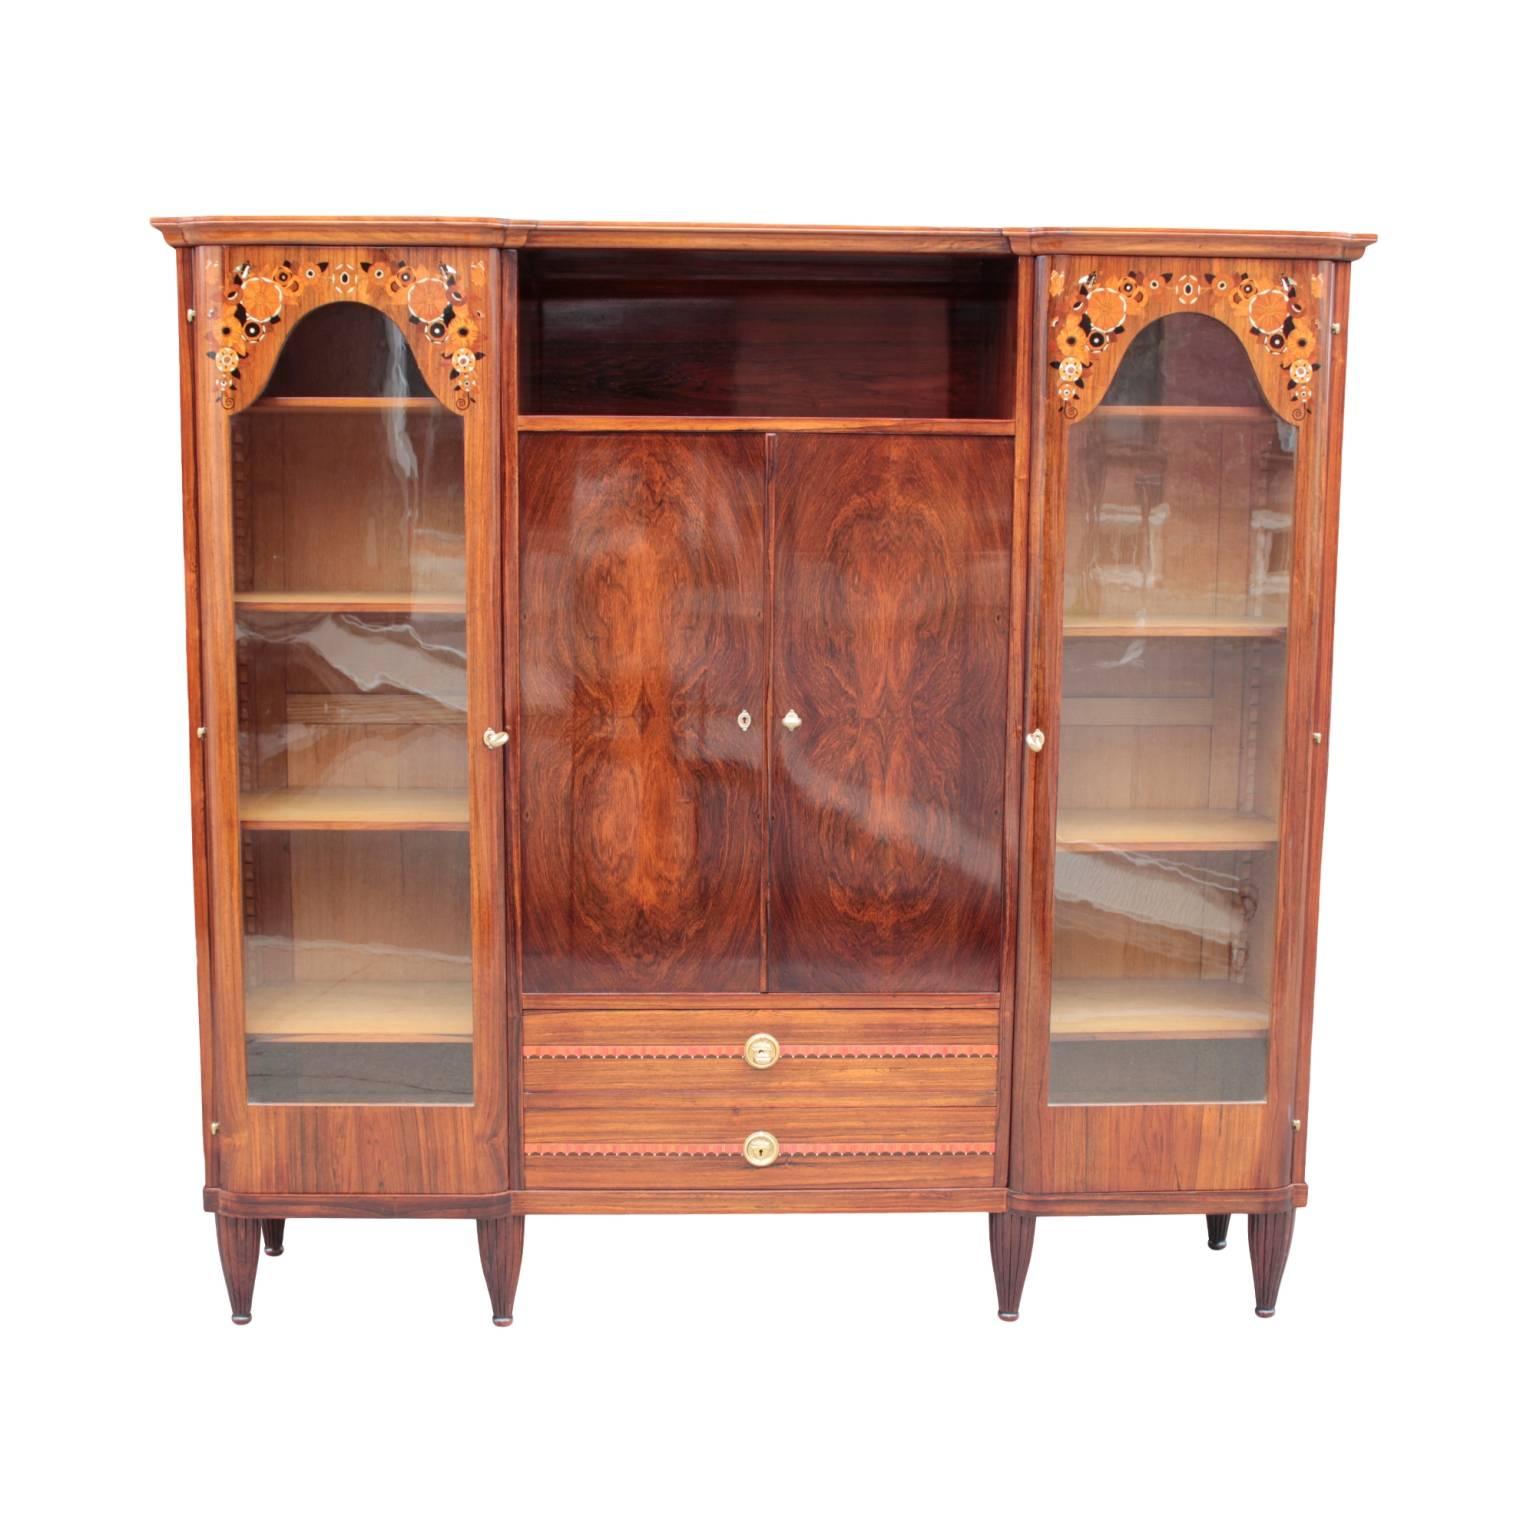 French Early Art Deco Vitrine Bookcase, attributed to Maurice Dufrene In Excellent Condition For Sale In Hudson, NY